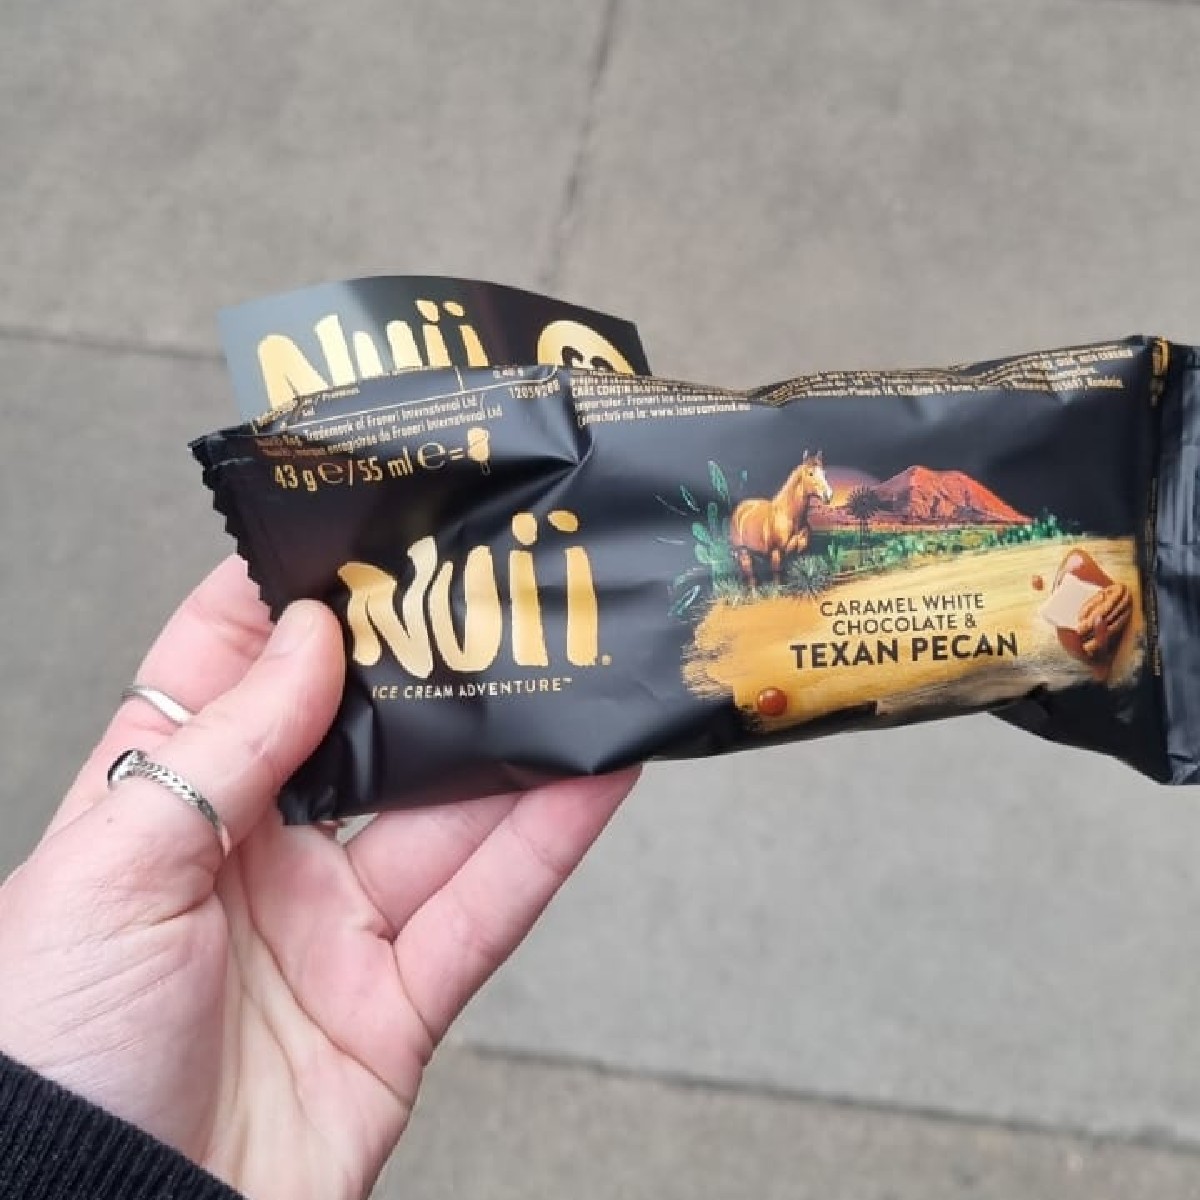 MSE Ciara was thrilled when she was handed a free ice lolly near MSE Towers. What's the best freebie you've snagged strolling down the street?